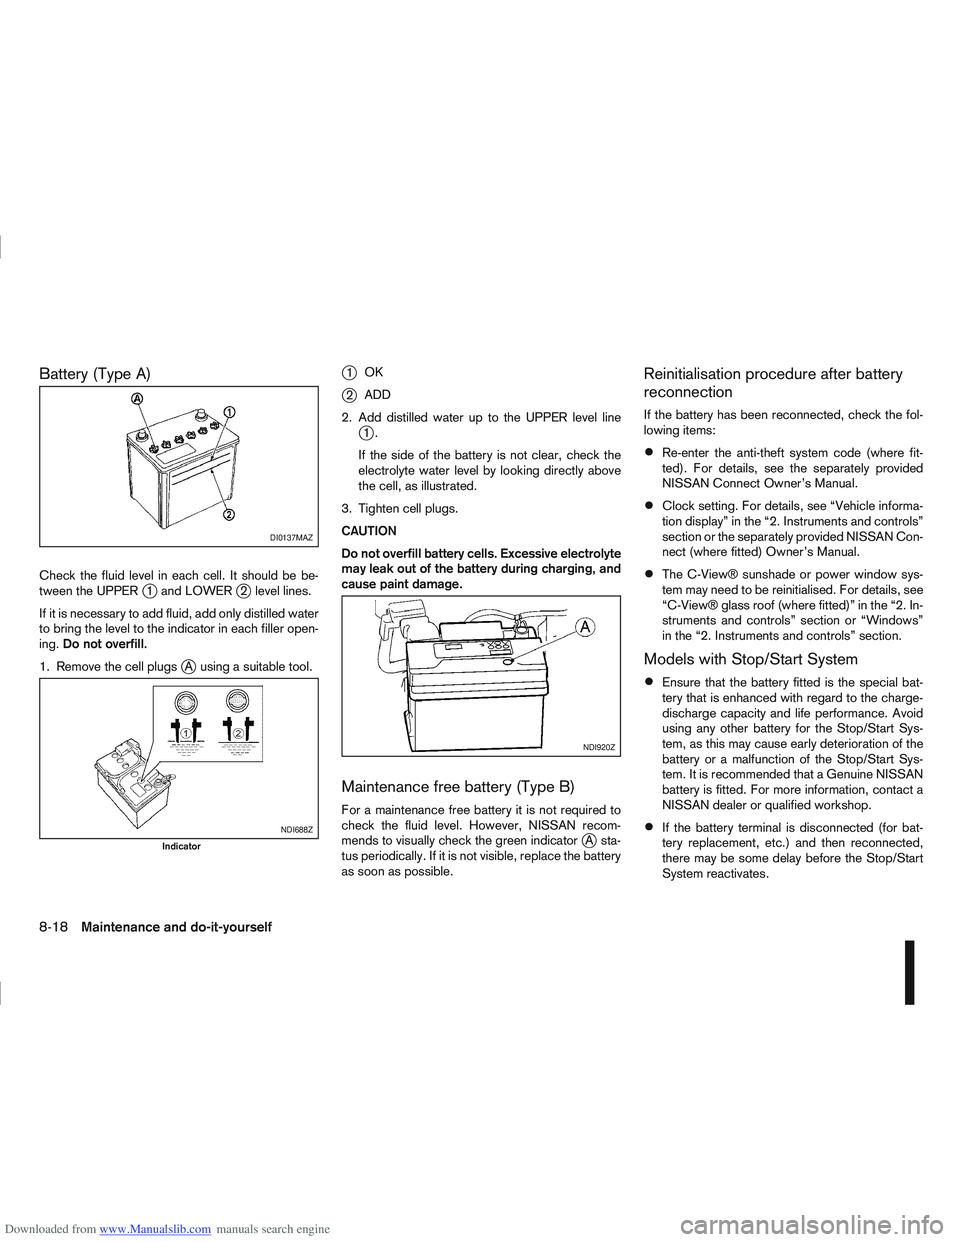 NISSAN QASHQAI 2007  Owners Manual Downloaded from www.Manualslib.com manuals search engine Battery (Type A)
Check the fluid level in each cell. It should be be-
tween the UPPERj1 and LOWERj2 level lines.
If it is necessary to add flui